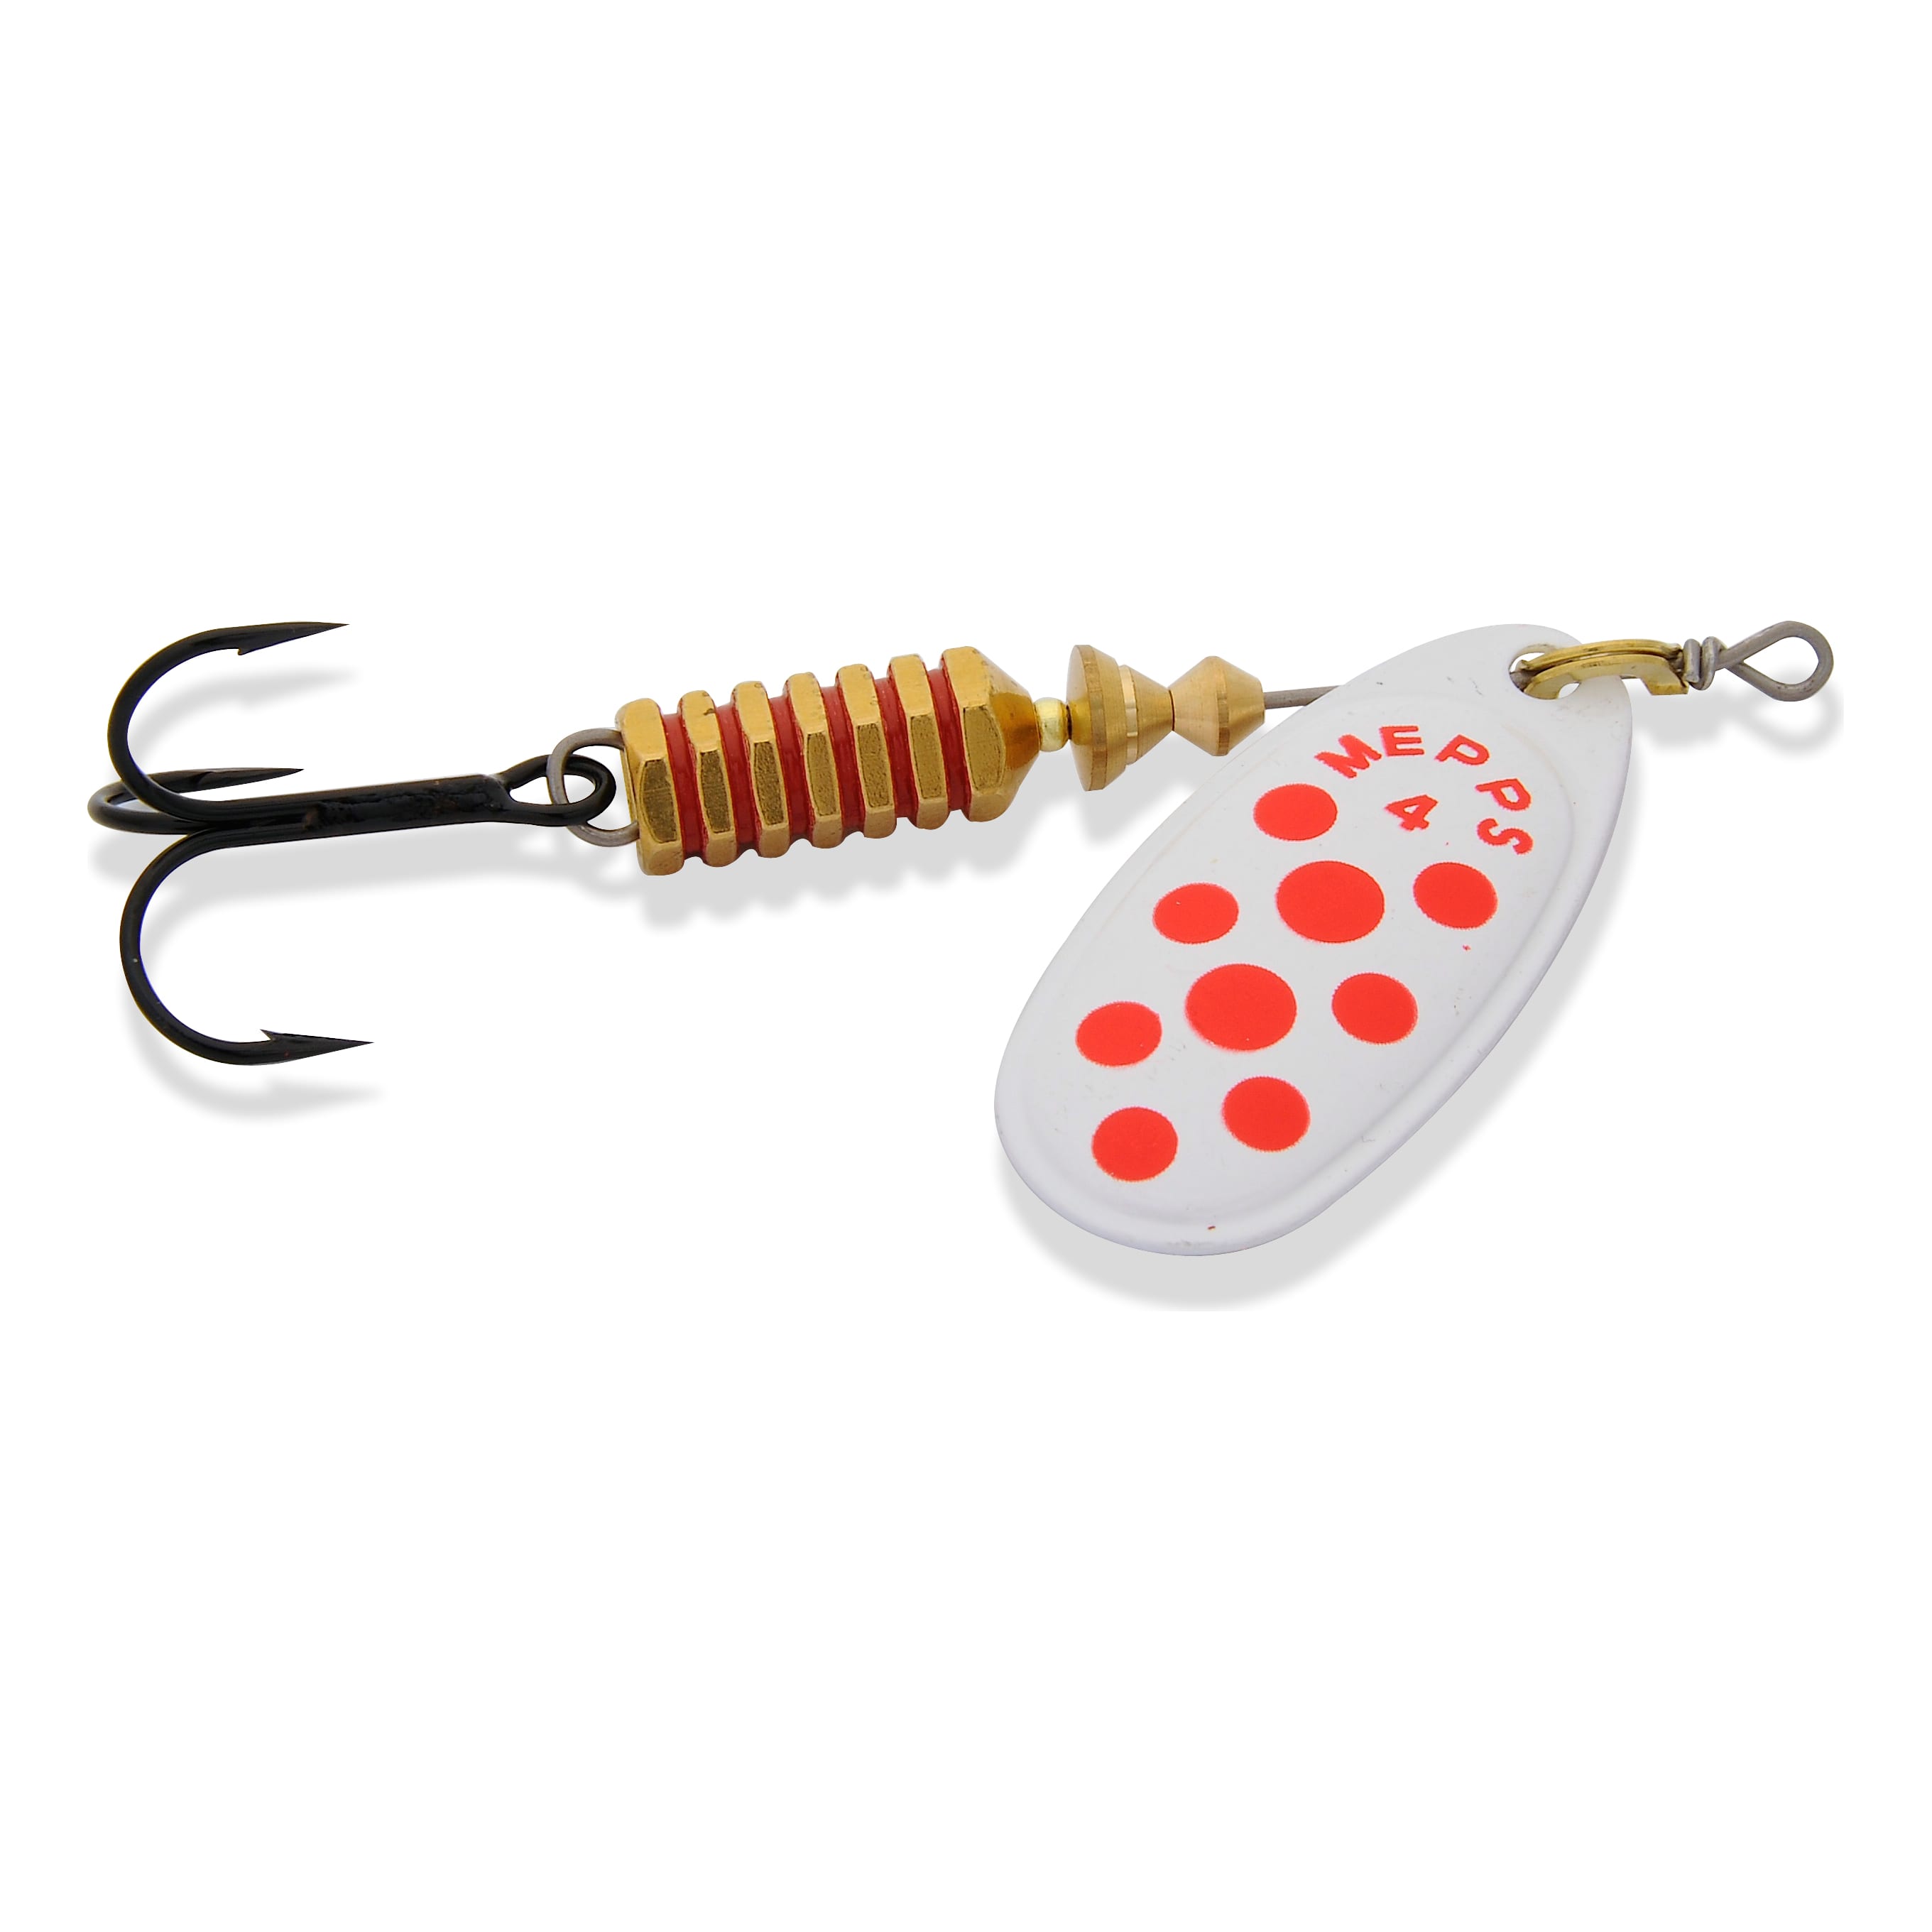 Mepps Aglia LongCast #2 8g Lure Spinner Trout Perch Pike Chub COLORS